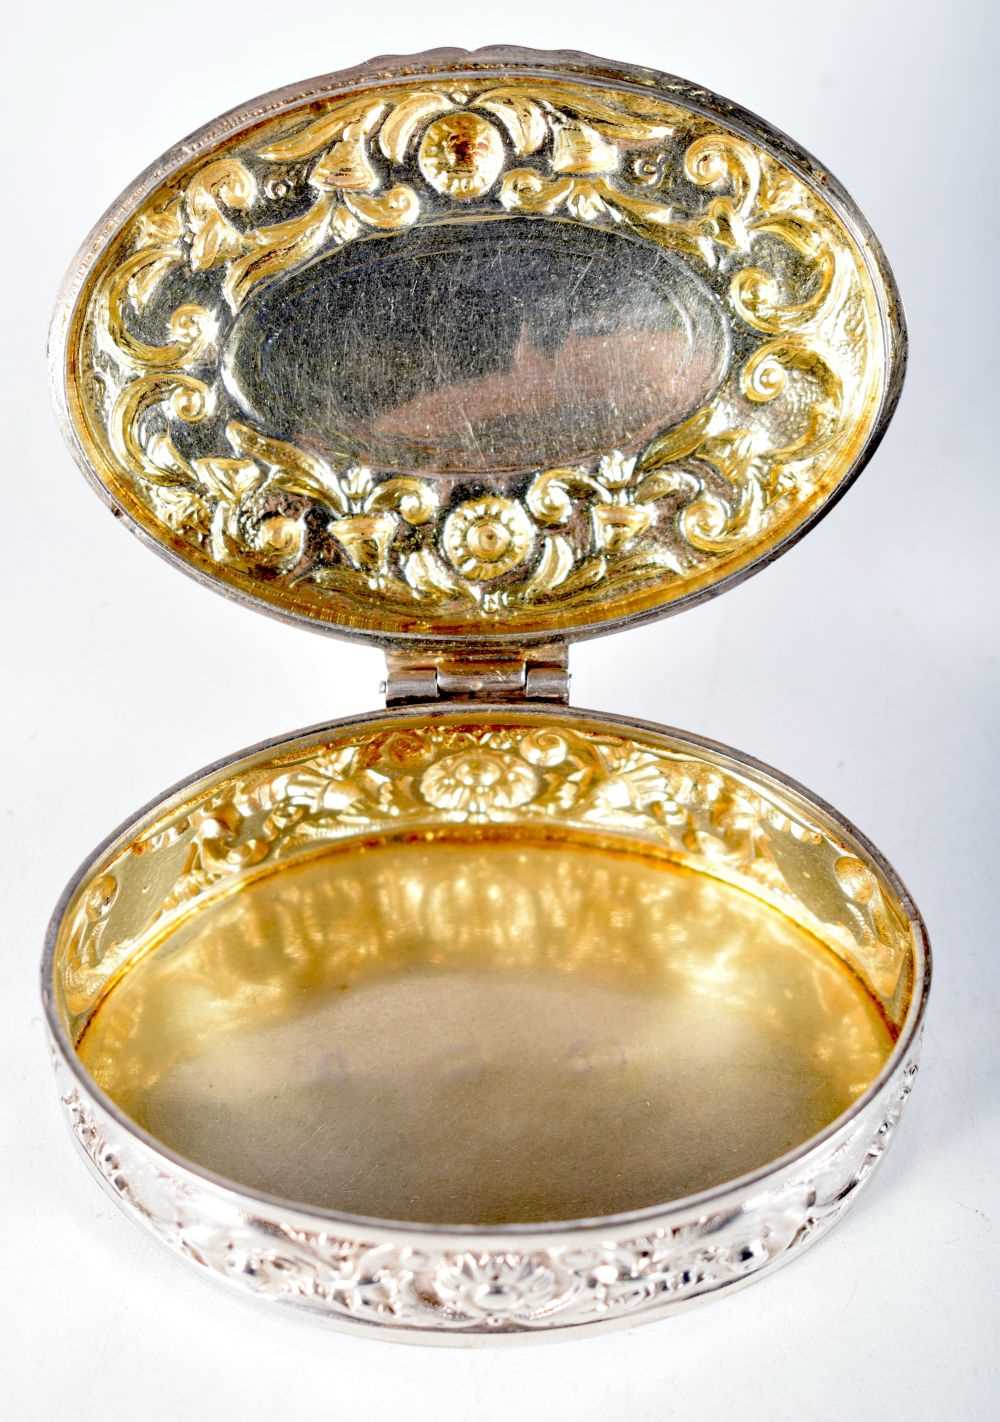 A RARE 18TH CENTURY SCOTTISH PROVINCIAL SILVER SNUFF BOX by John Baillie of Inverness. 61 grams. 8 - Image 3 of 3